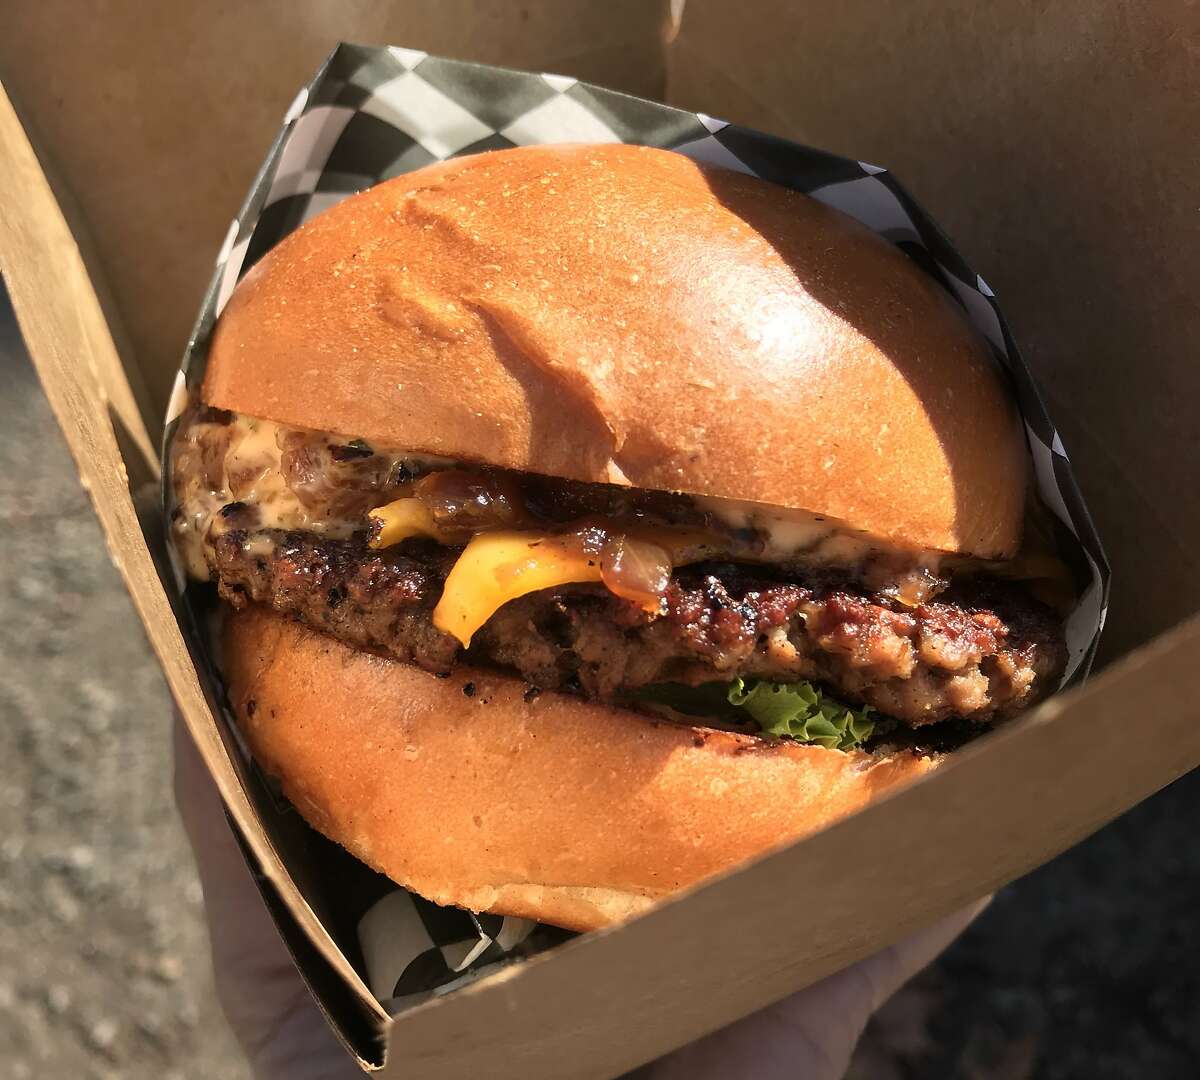 An Impossible Burger topped with vegan American cheese and caramelized onions from Malibu's Burgers, an all-vegan restaurant in Oakland.